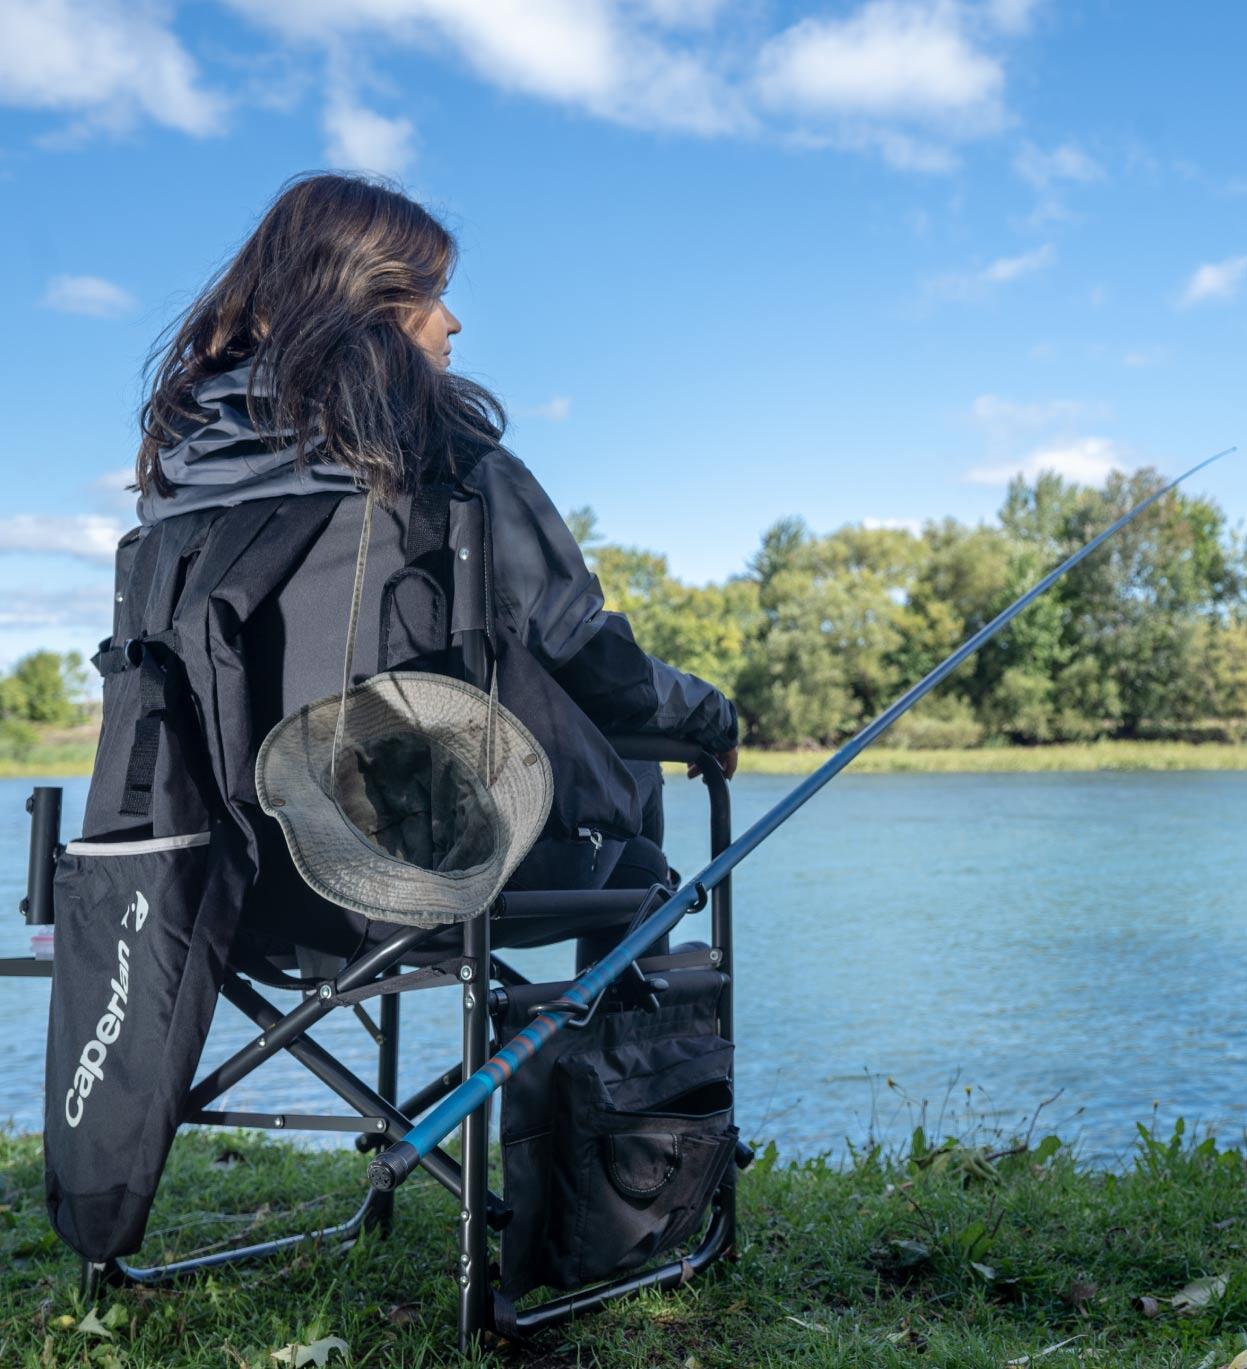 Buy best fishing products online at Decathlon.